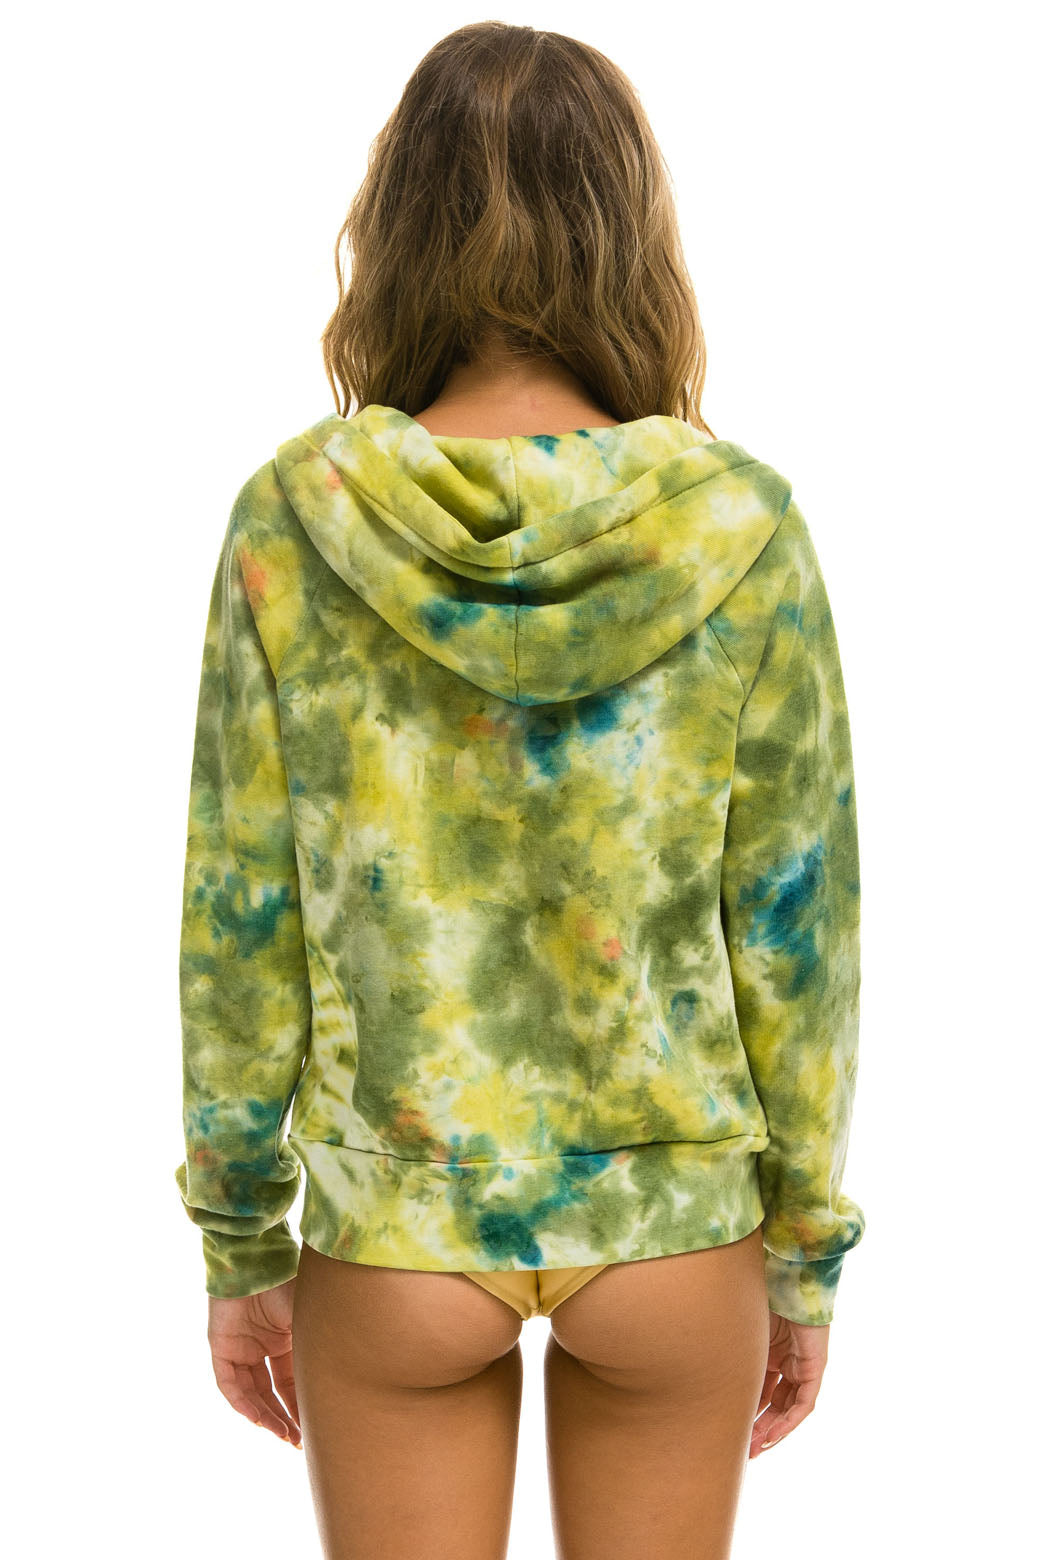 RELAXED HAND DYED ZIP HOODIE - TIE DYE GREEN YELLOW - Aviator Nation